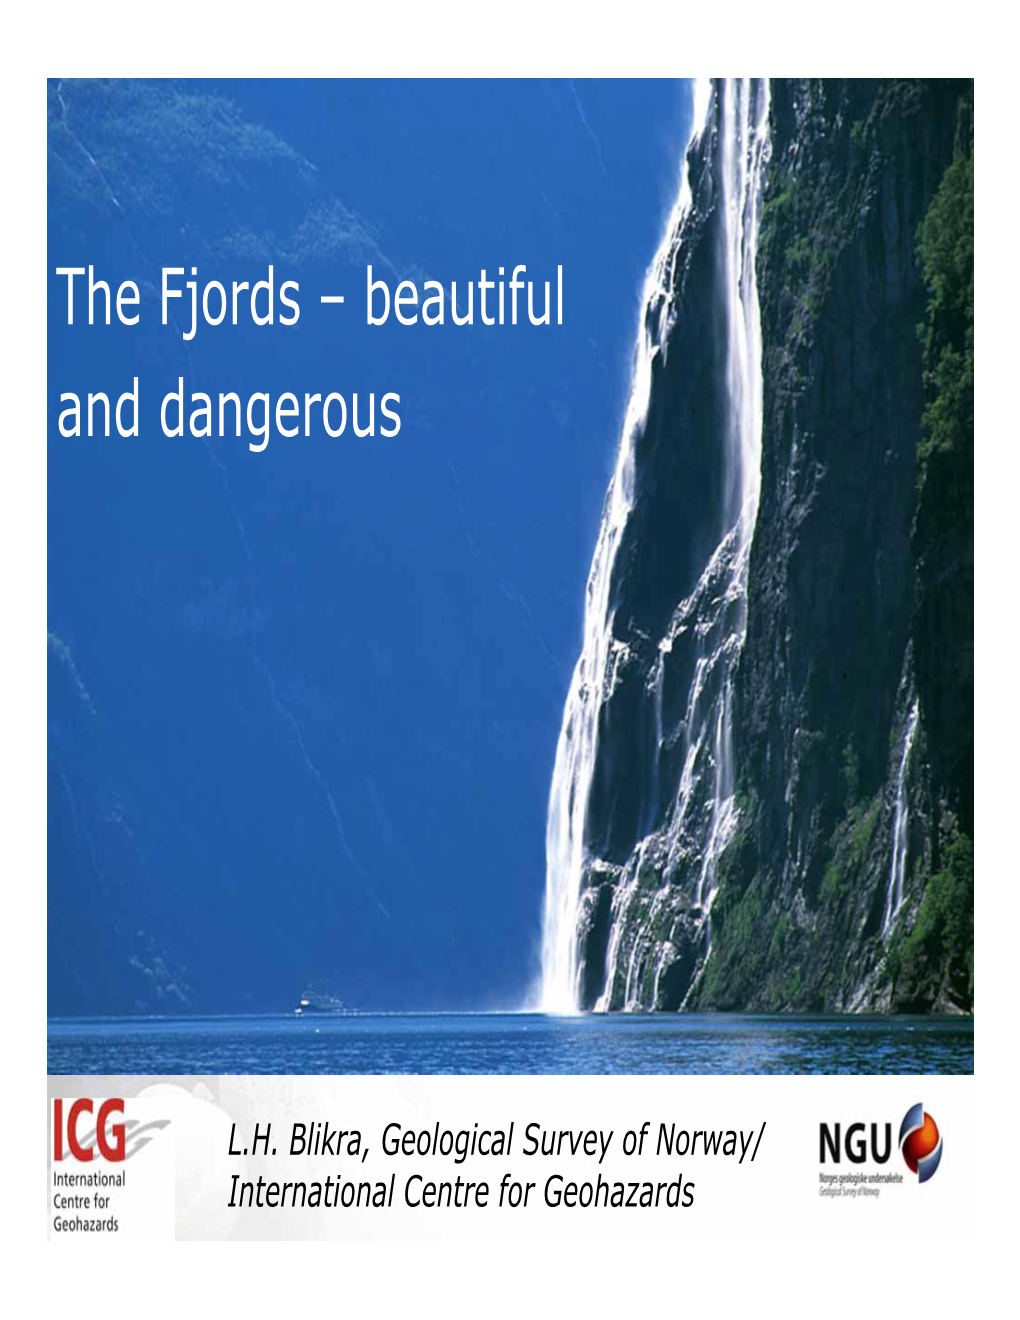 The Fjords – Beautiful and Dangerous